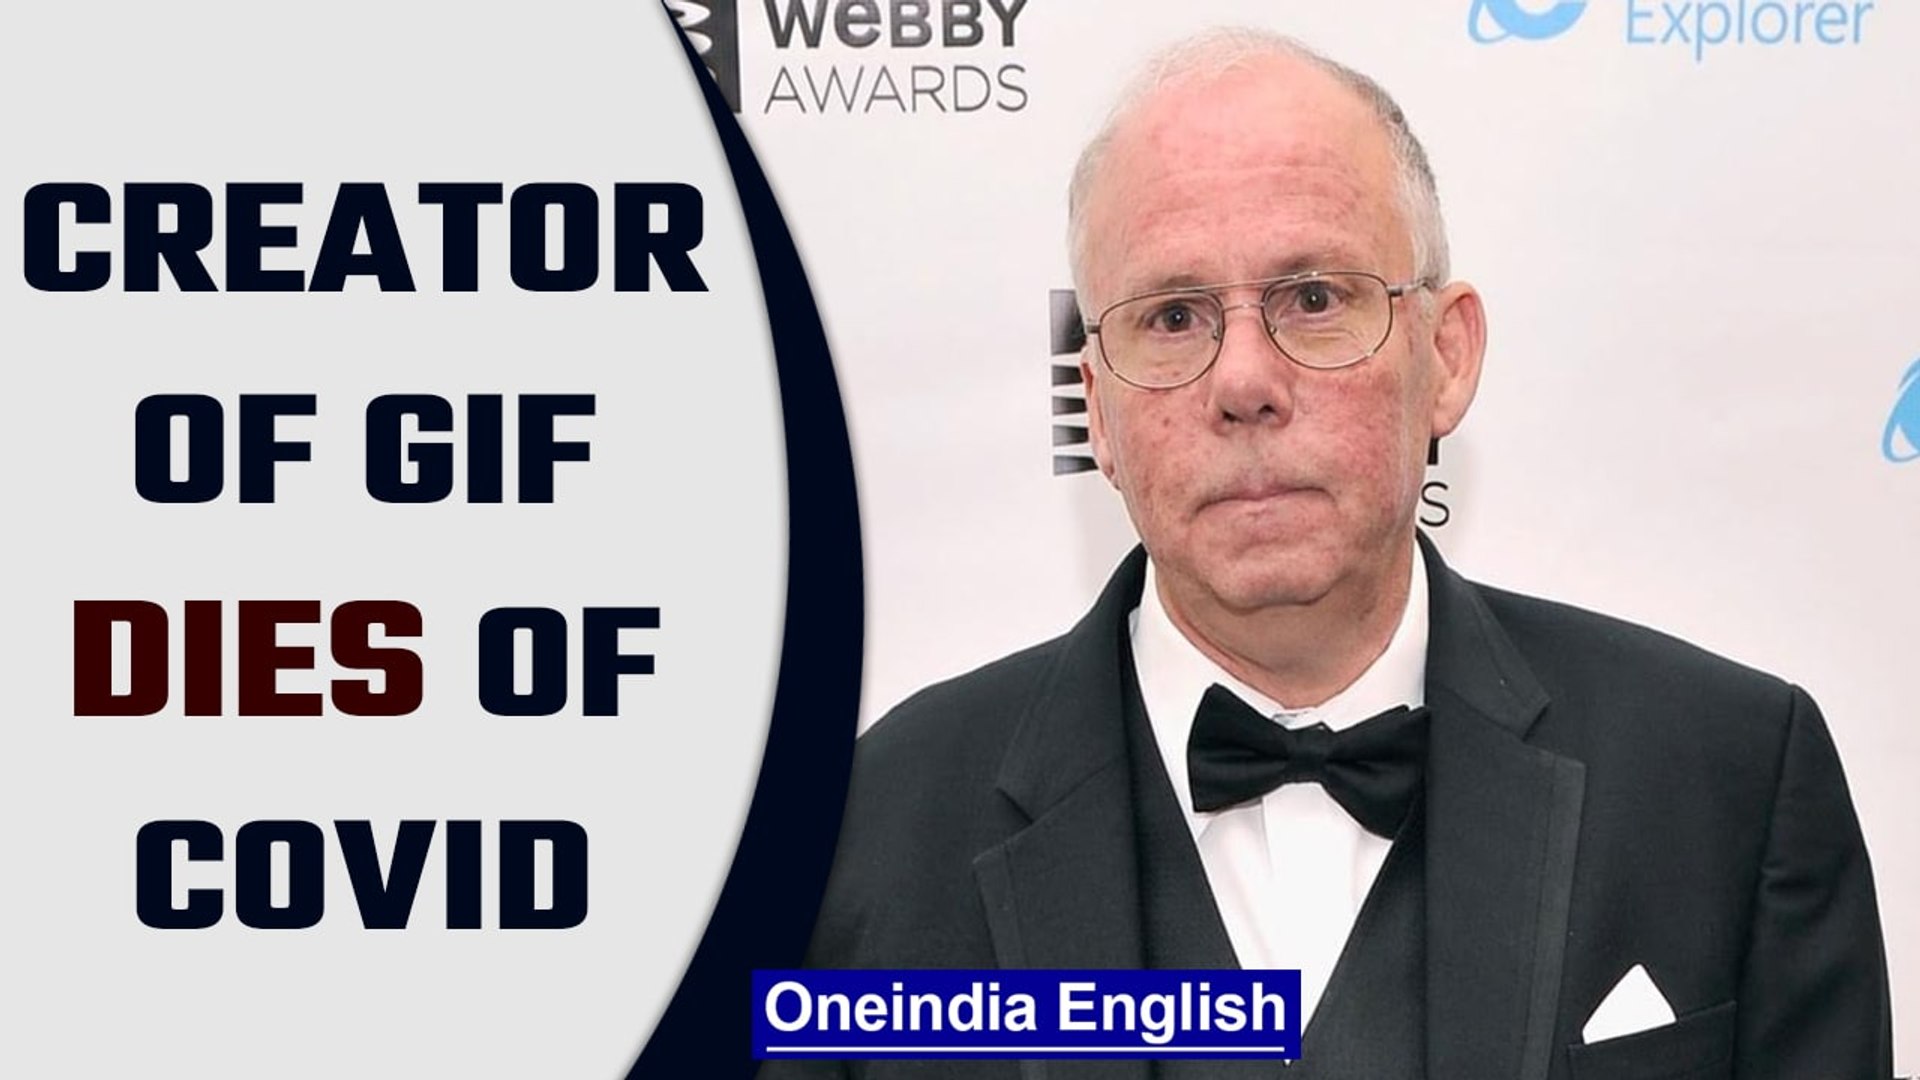 He helped shape the modern world': gif inventor Stephen Wilhite dies after  getting Covid, Technology